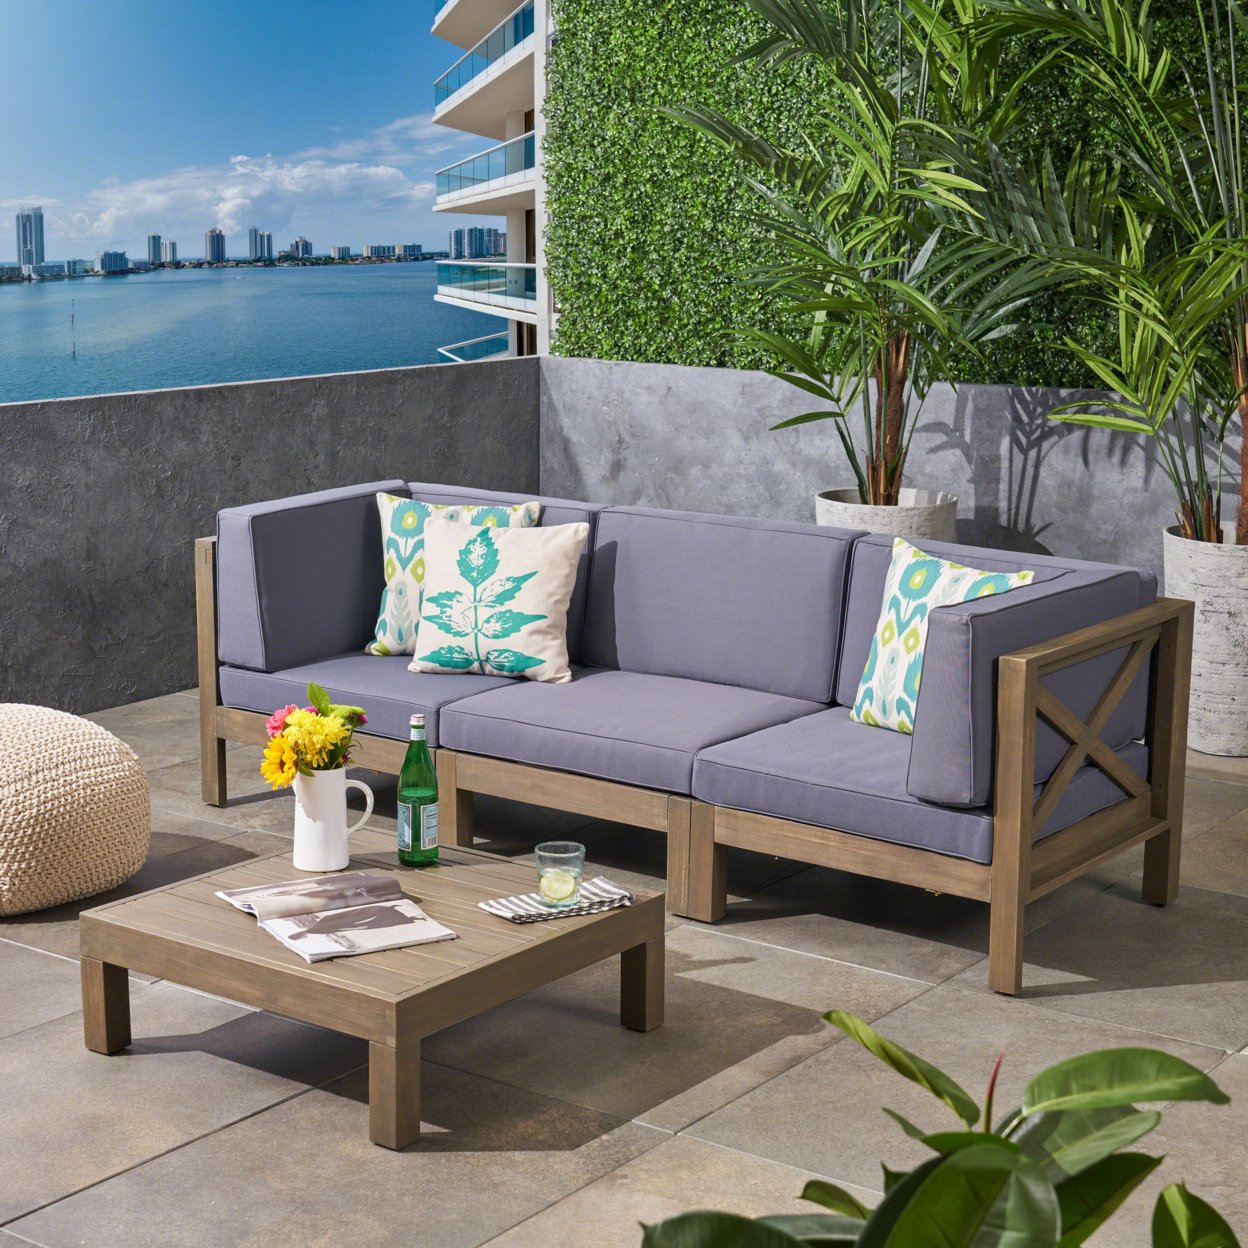 Great Deal Furniture Keith Outdoor Sectional Sofa Set With Coffee Table 3-Seater Acacia Wood Water-Resistant Cushions - White